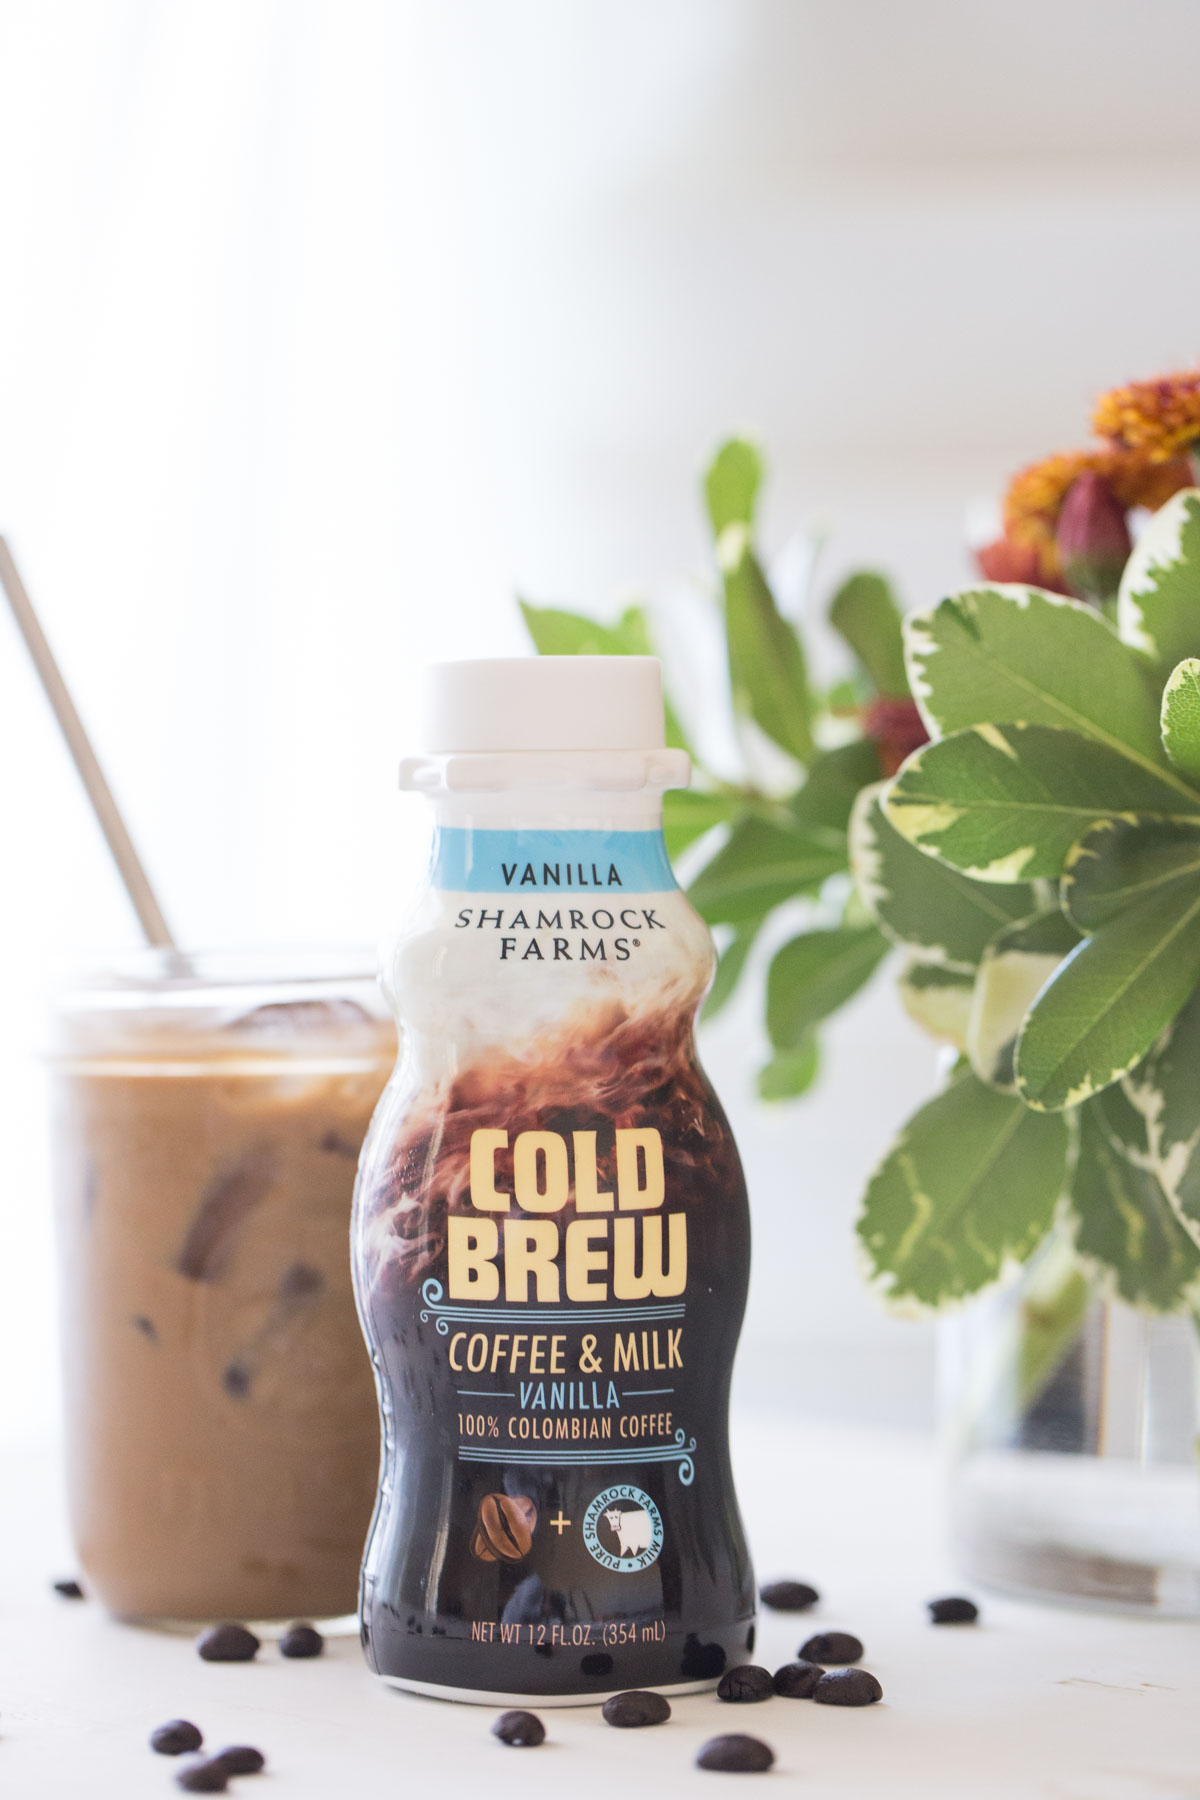 Shamrock Farms Cold Brew Coffee is a great way to enjoy a little treat during this busy season and power through that afternoon slump!